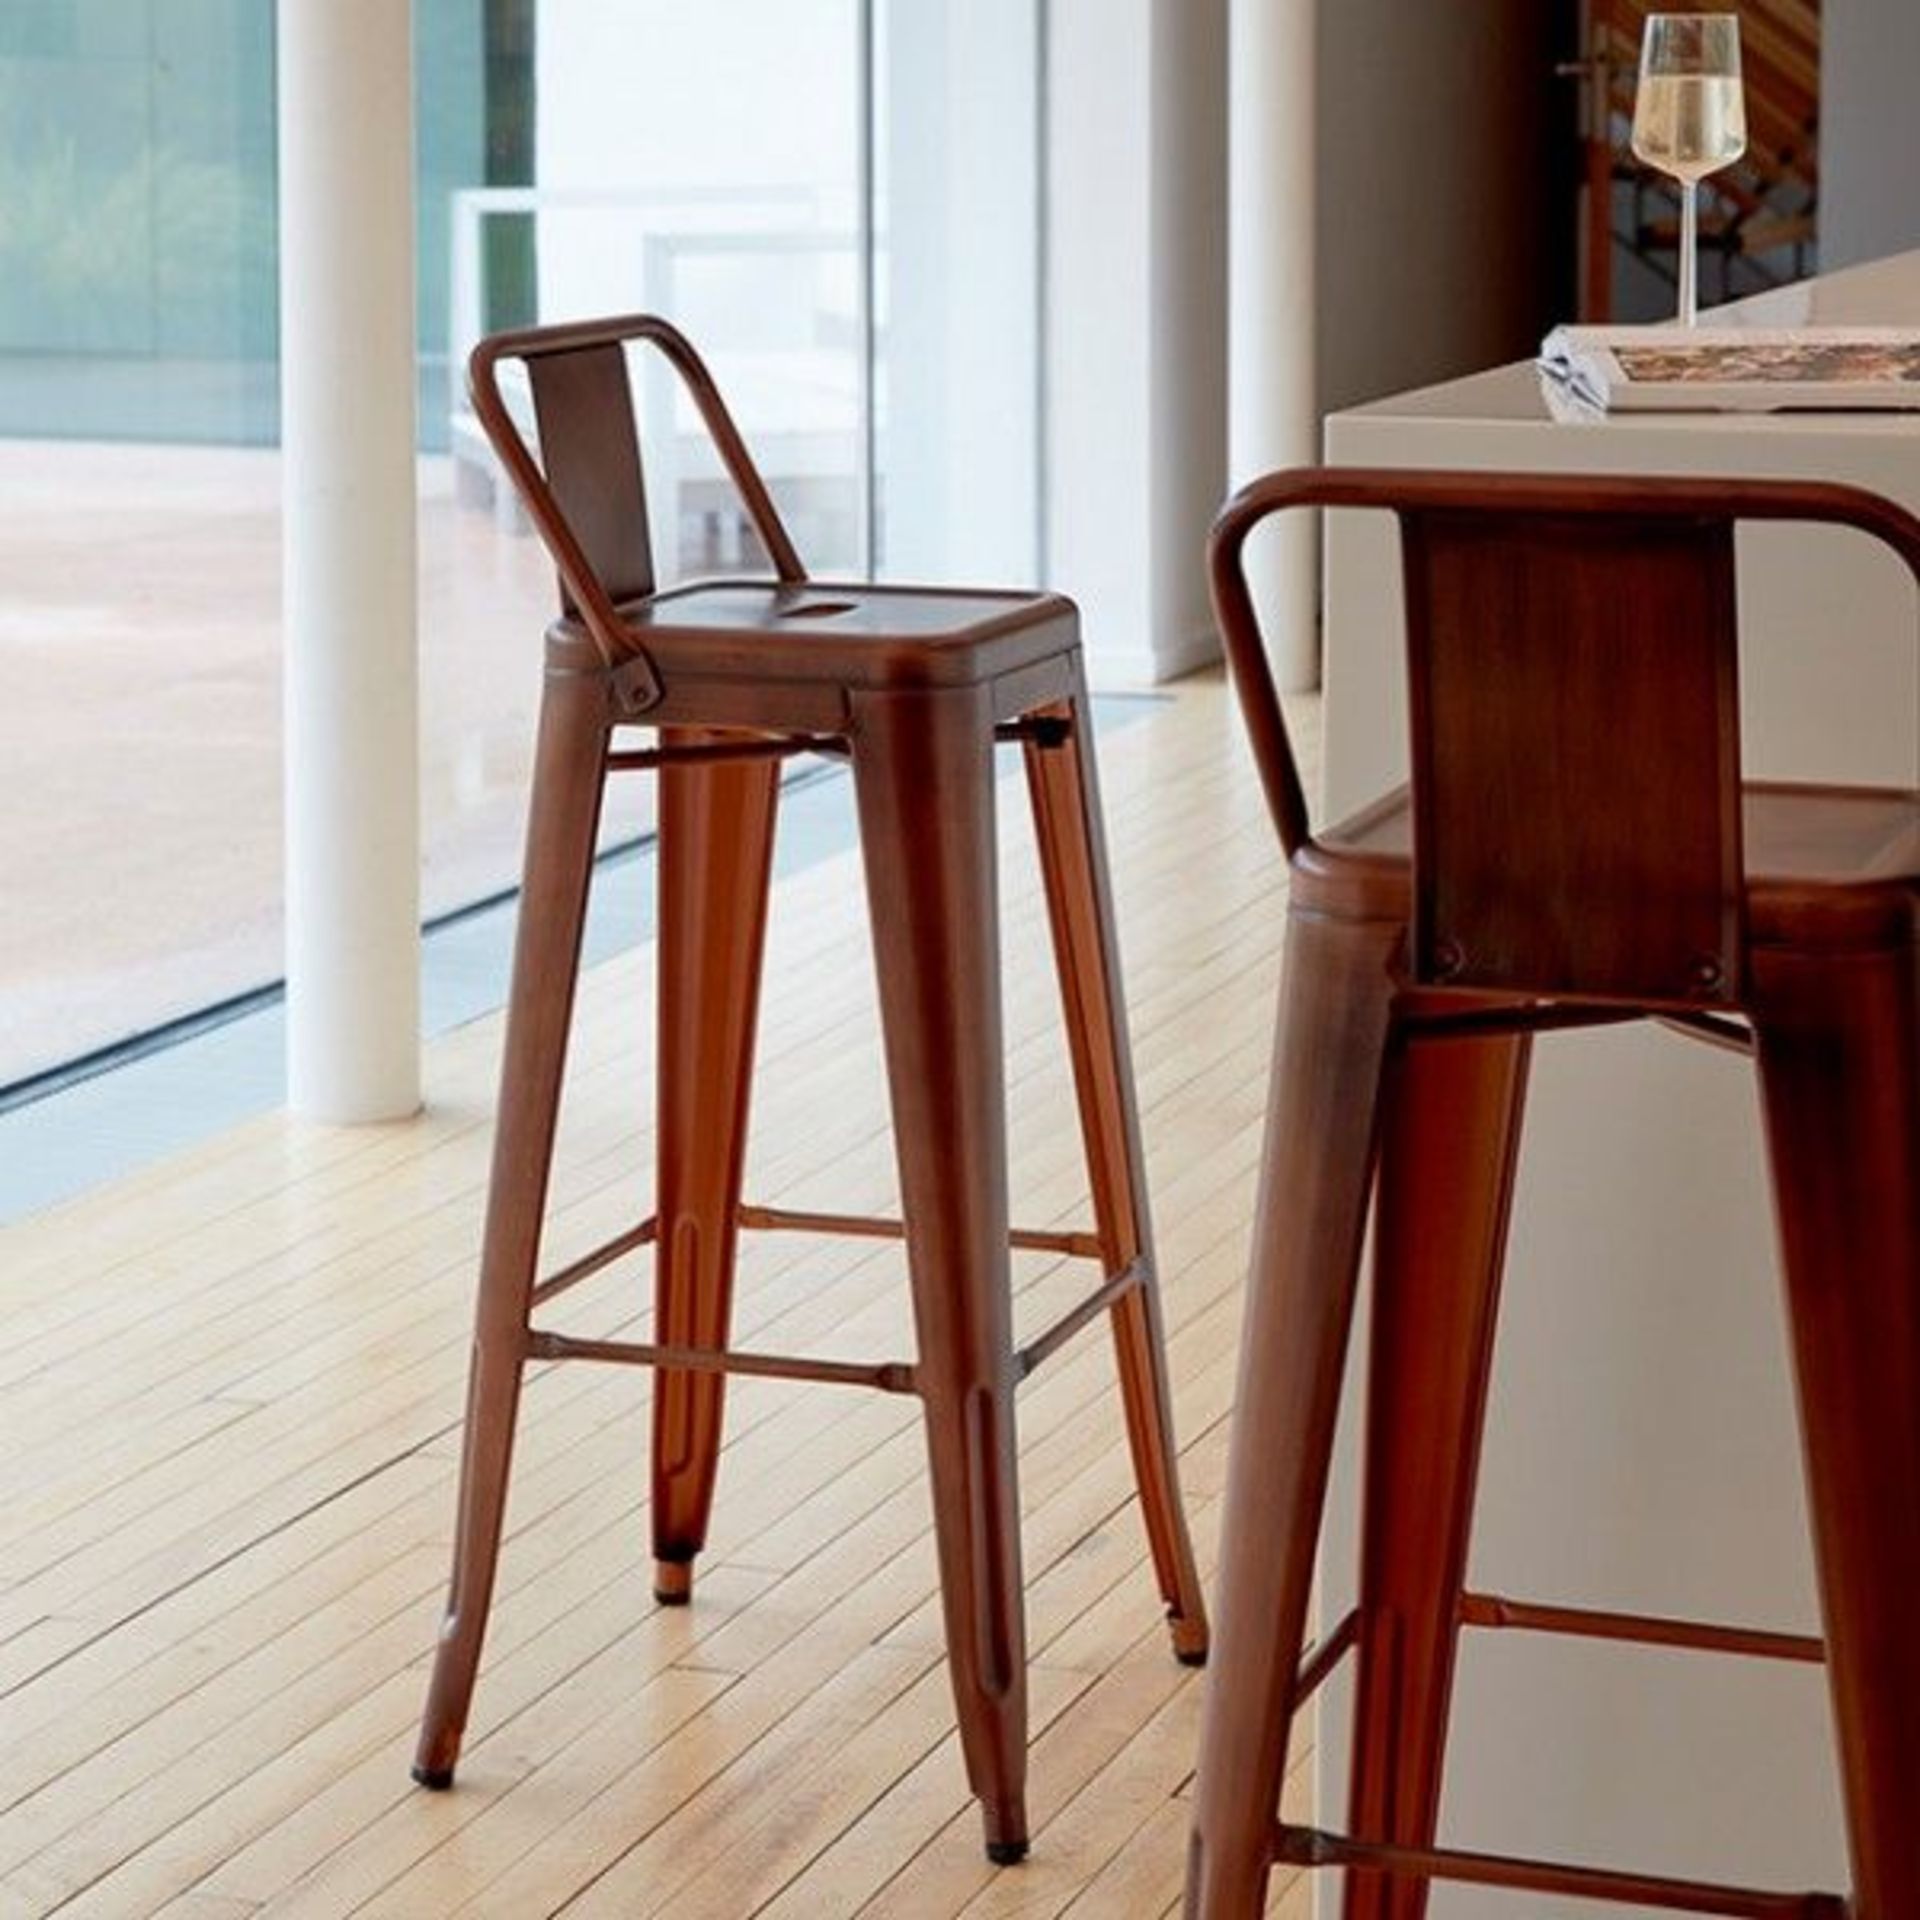 4 x Industrial Tolix Style Stackable Bar Stools With Backrests - Finish: COPPER - Ideal For Bistros, - Image 6 of 6